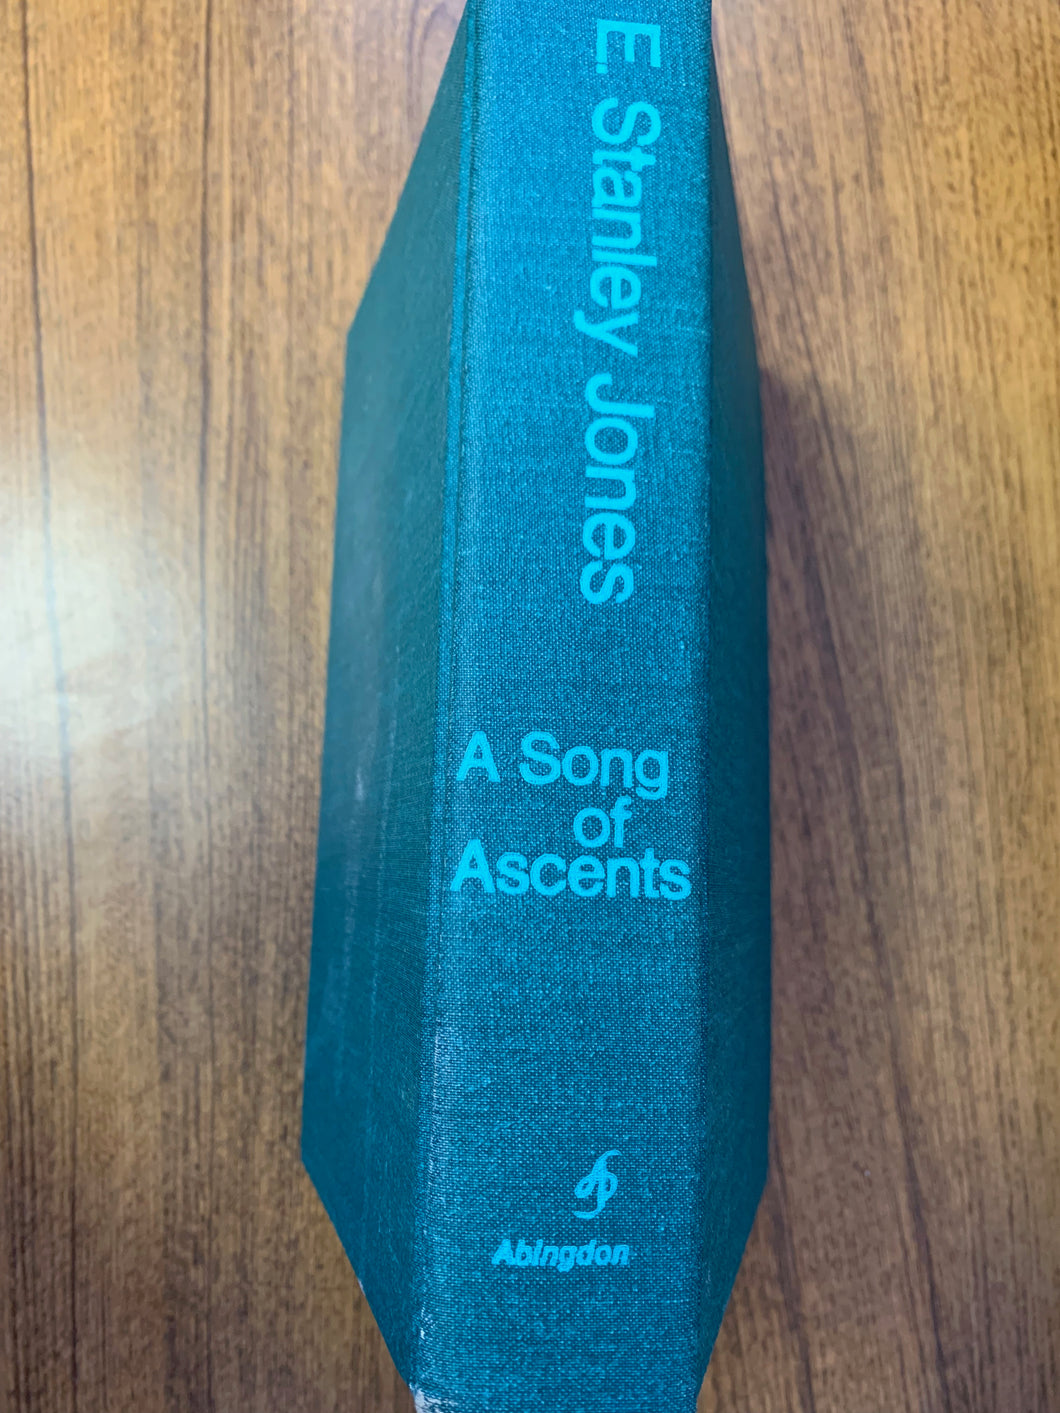 A Song of Ascents by E. Stanley Jones